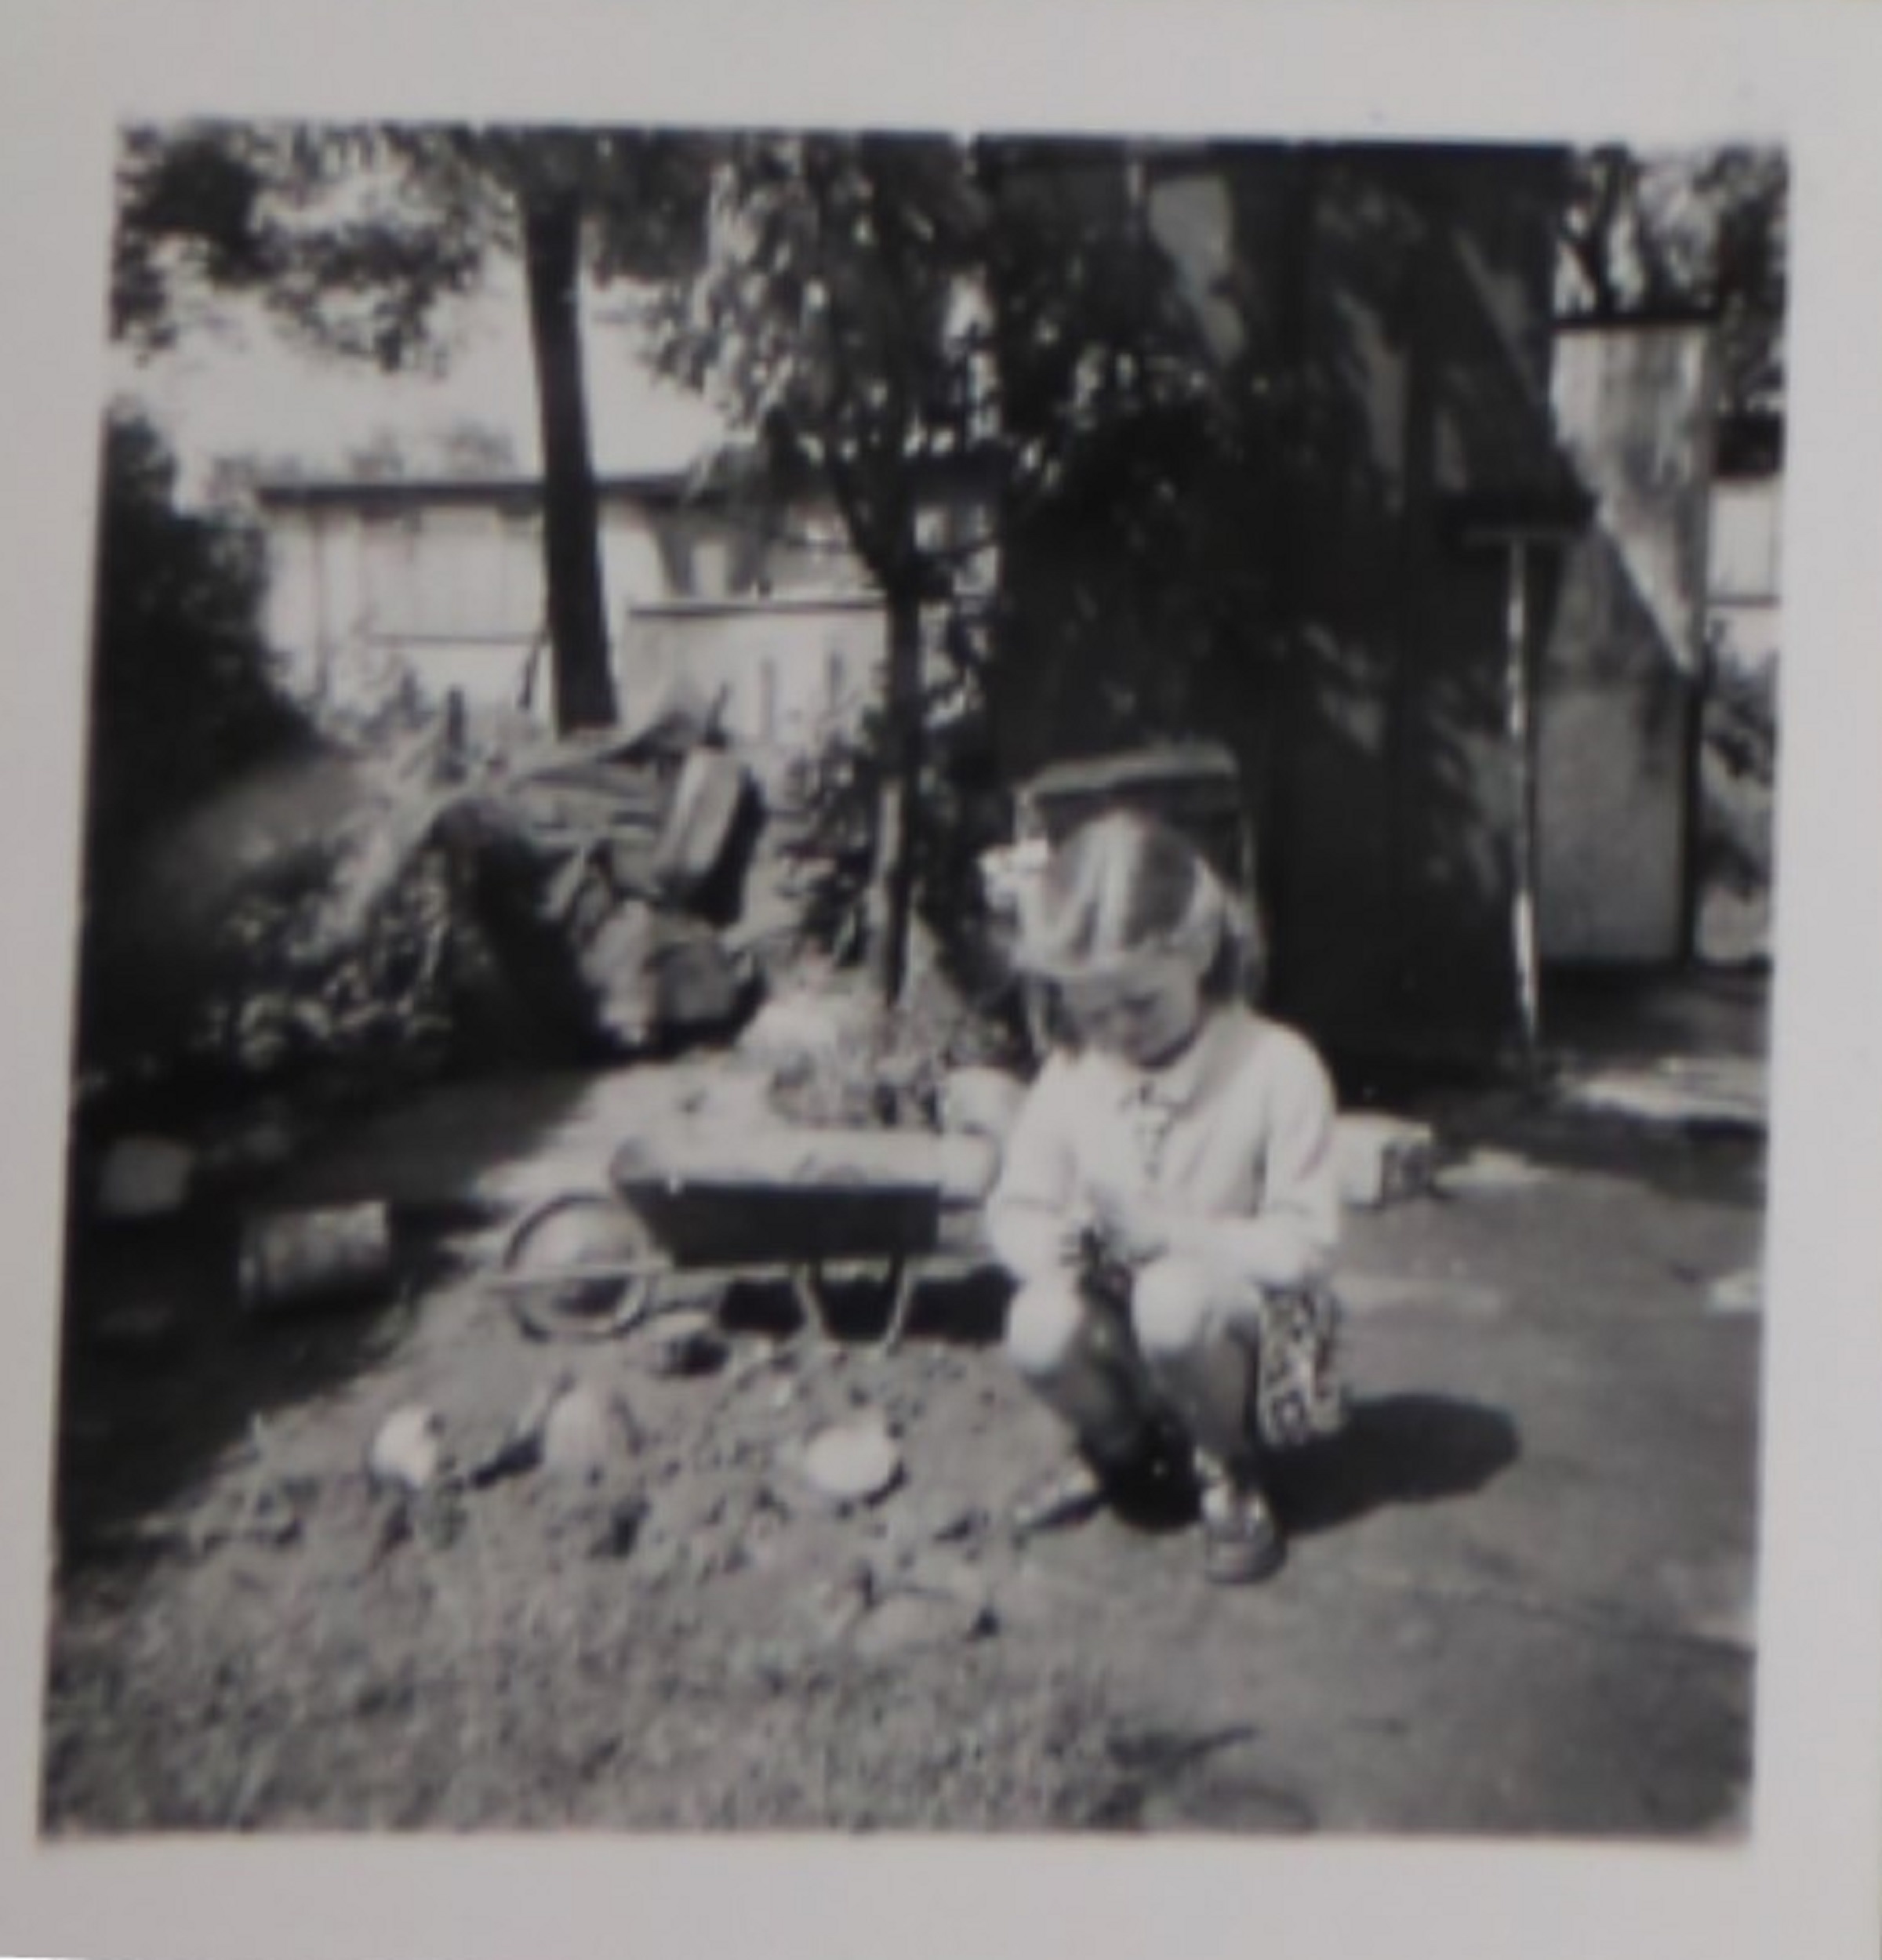 Penny Bishop as a small child playing with a toy wheelbarrow in the prefab garden